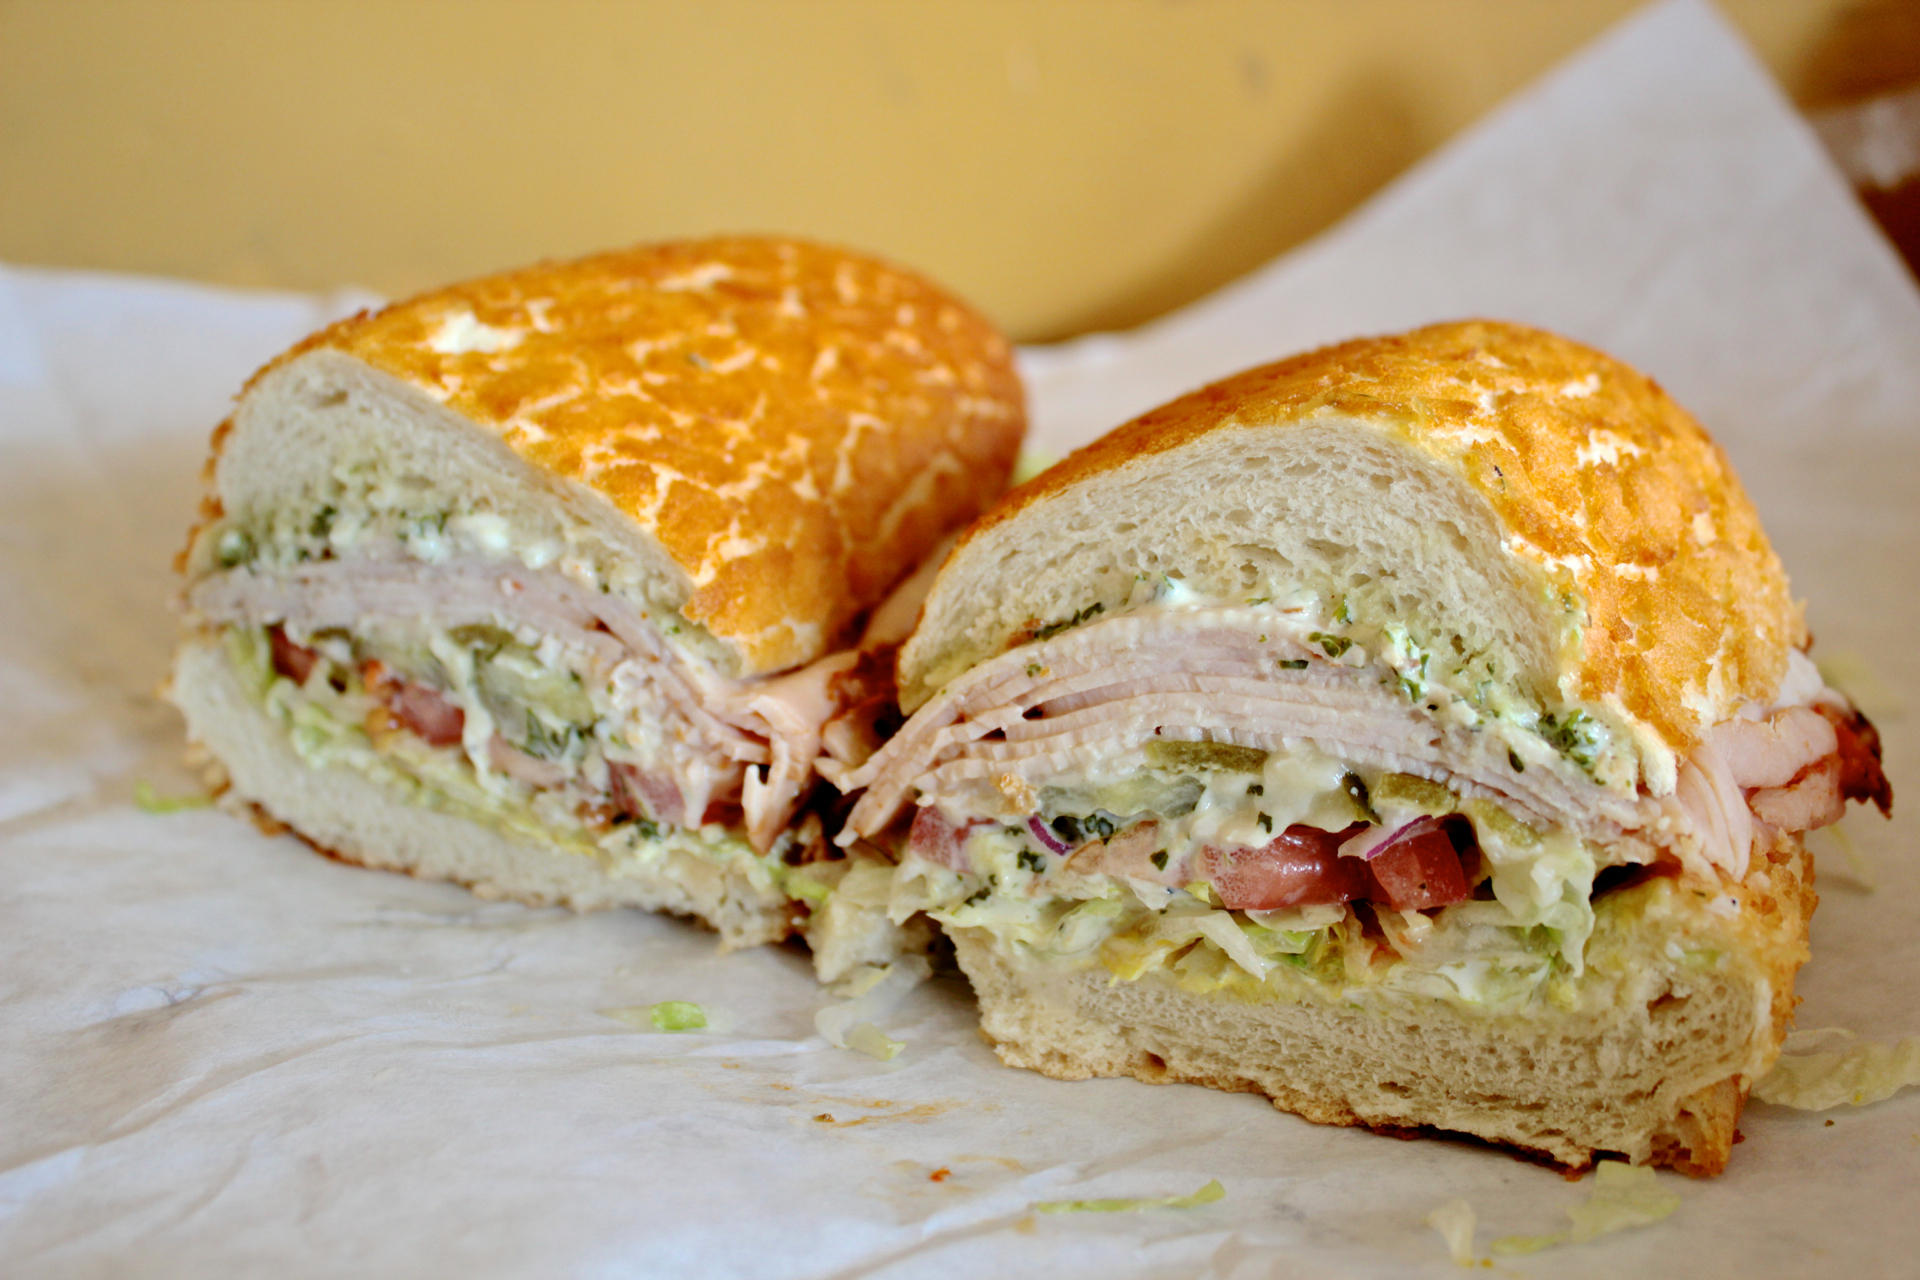 The Hot Bird features turkey, roasted green peppers, pepper jack cheese and caesar dressing.